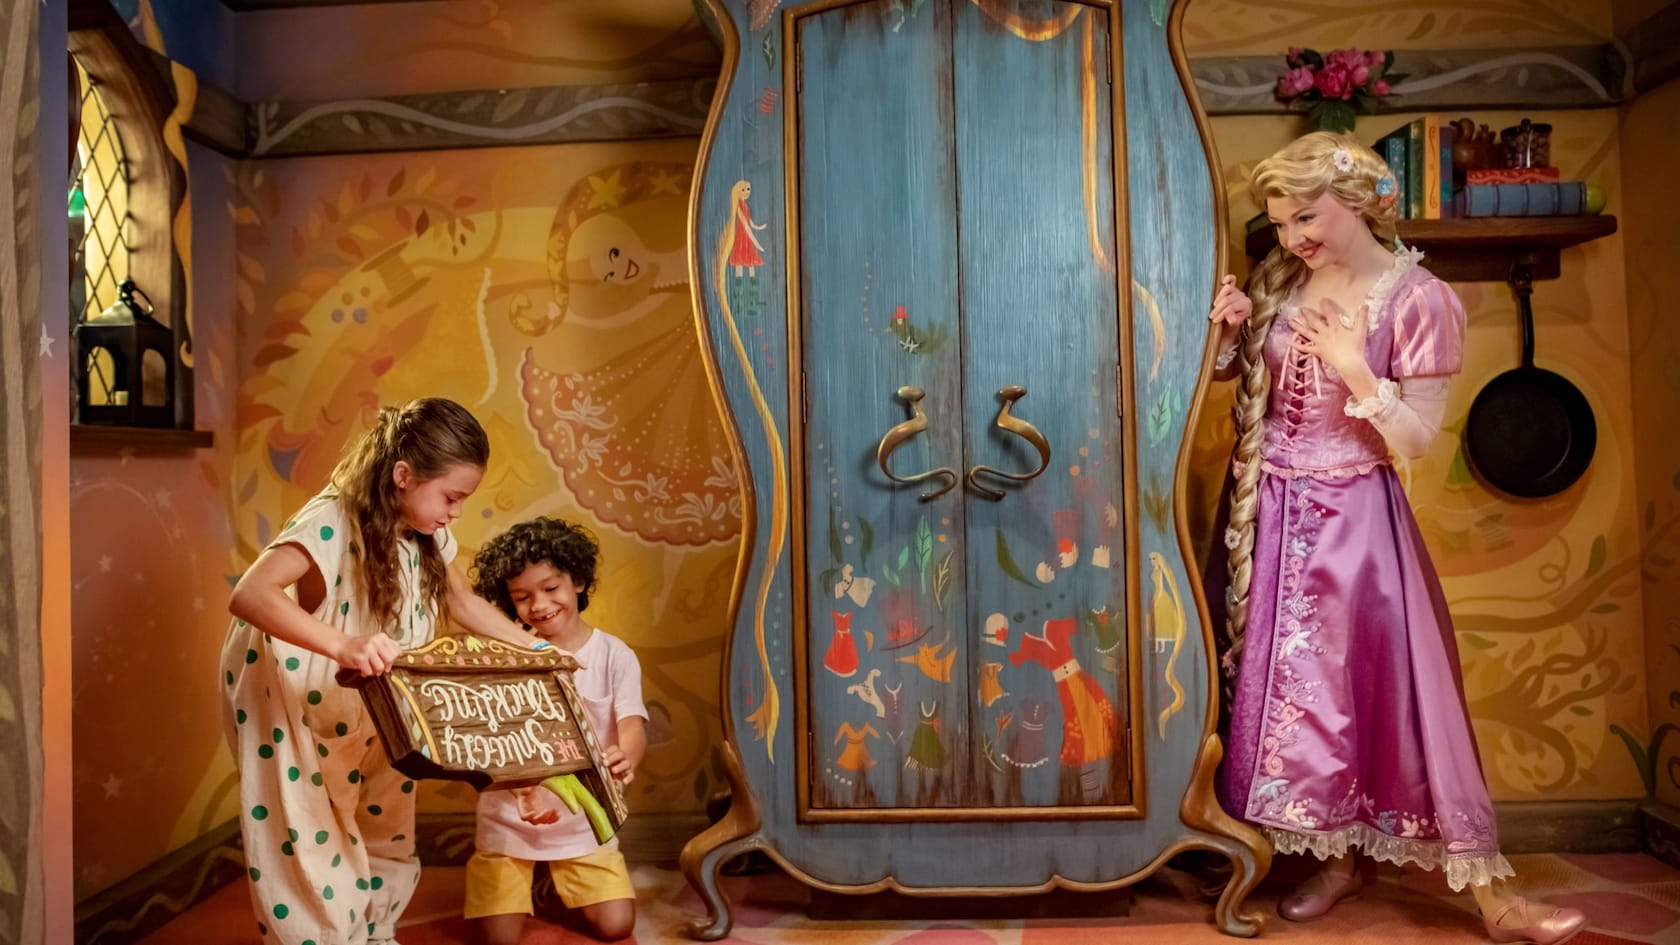 Rapunzel peeking around an armoire at 2 small children playing in a fanciful storybook setting